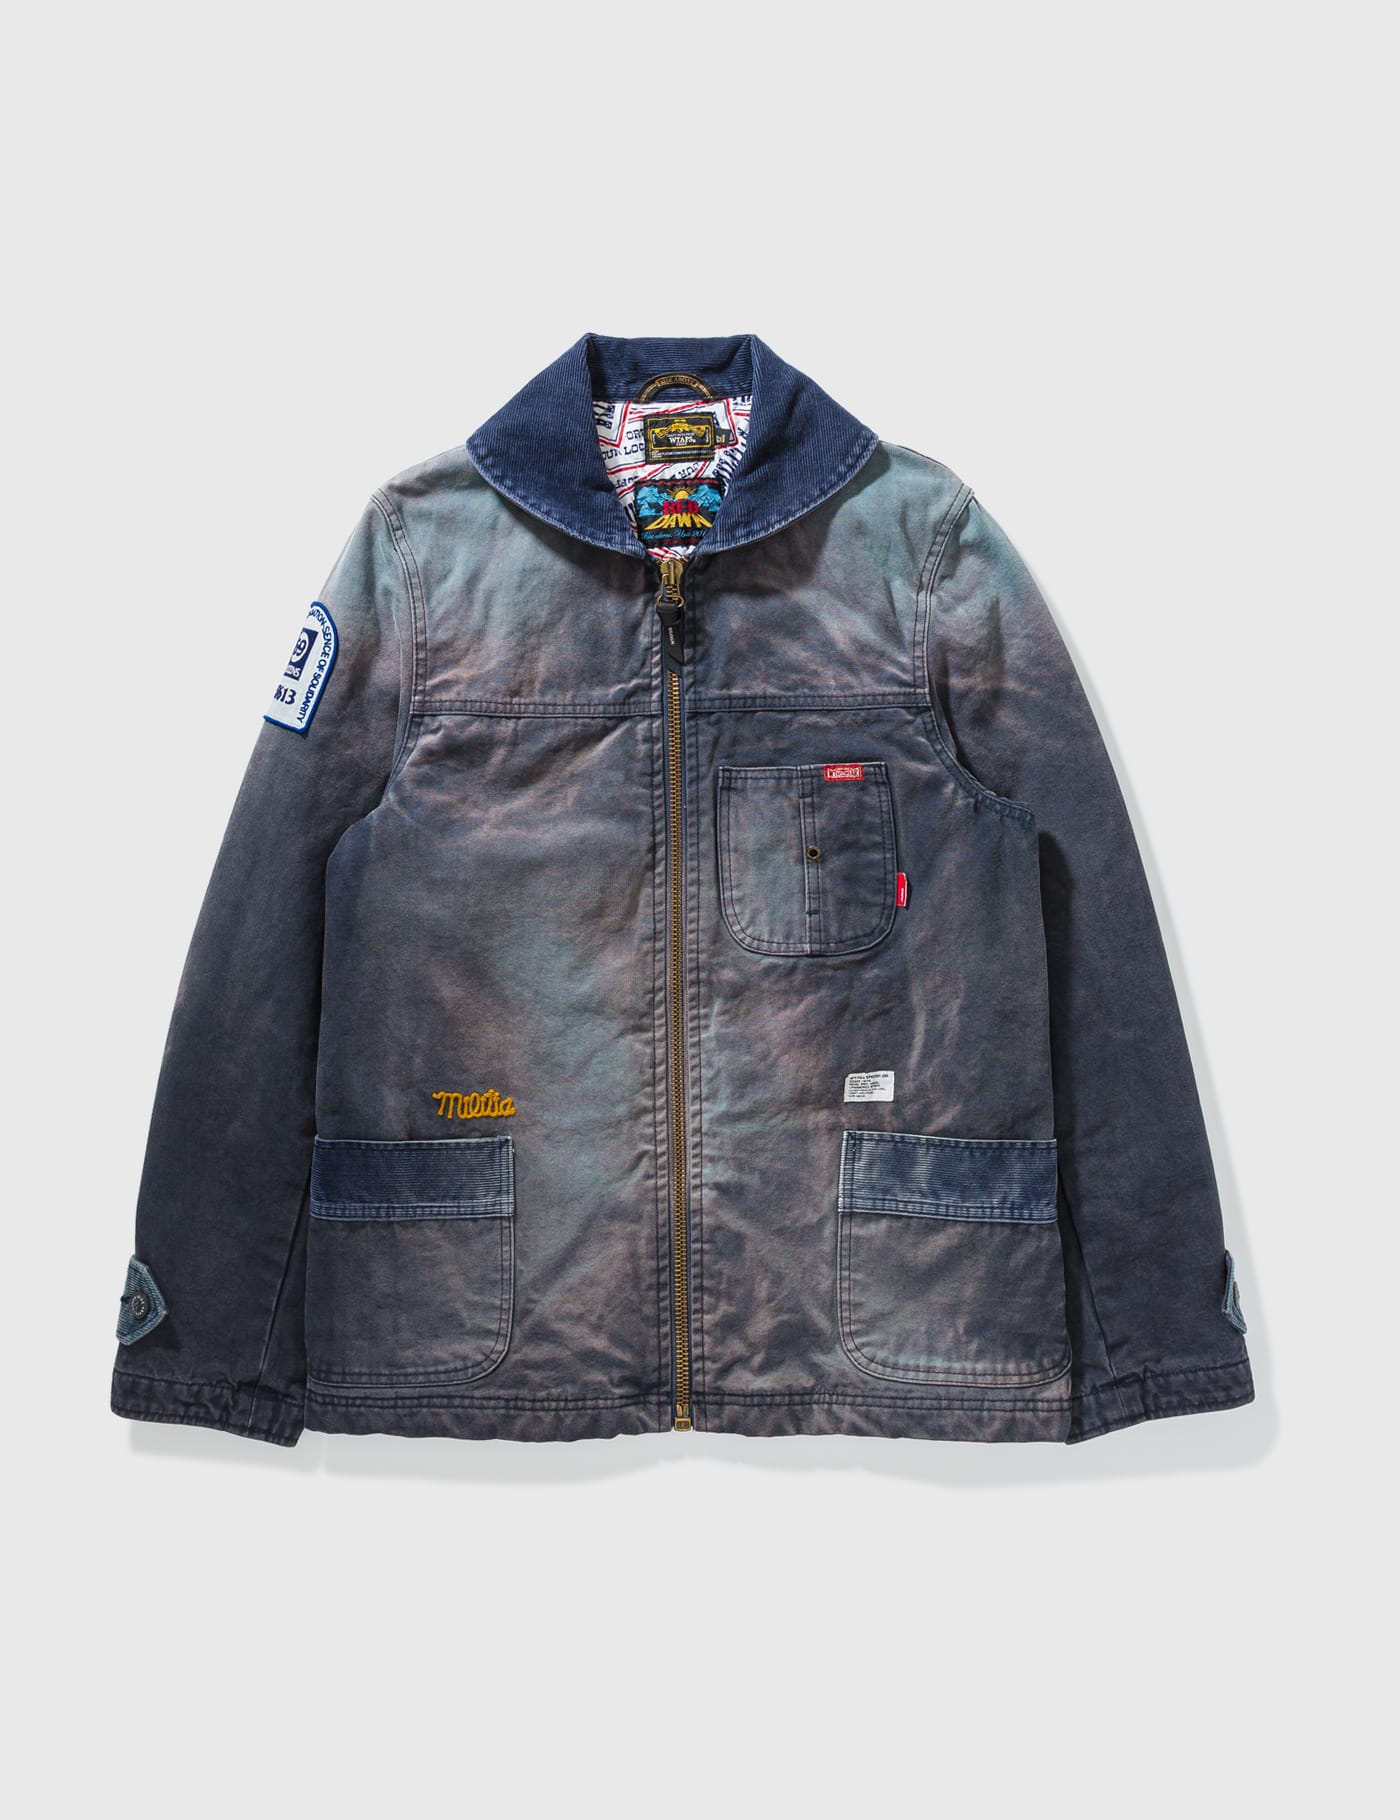 WTAPS | HBX - Globally Curated Fashion and Lifestyle by Hypebeast